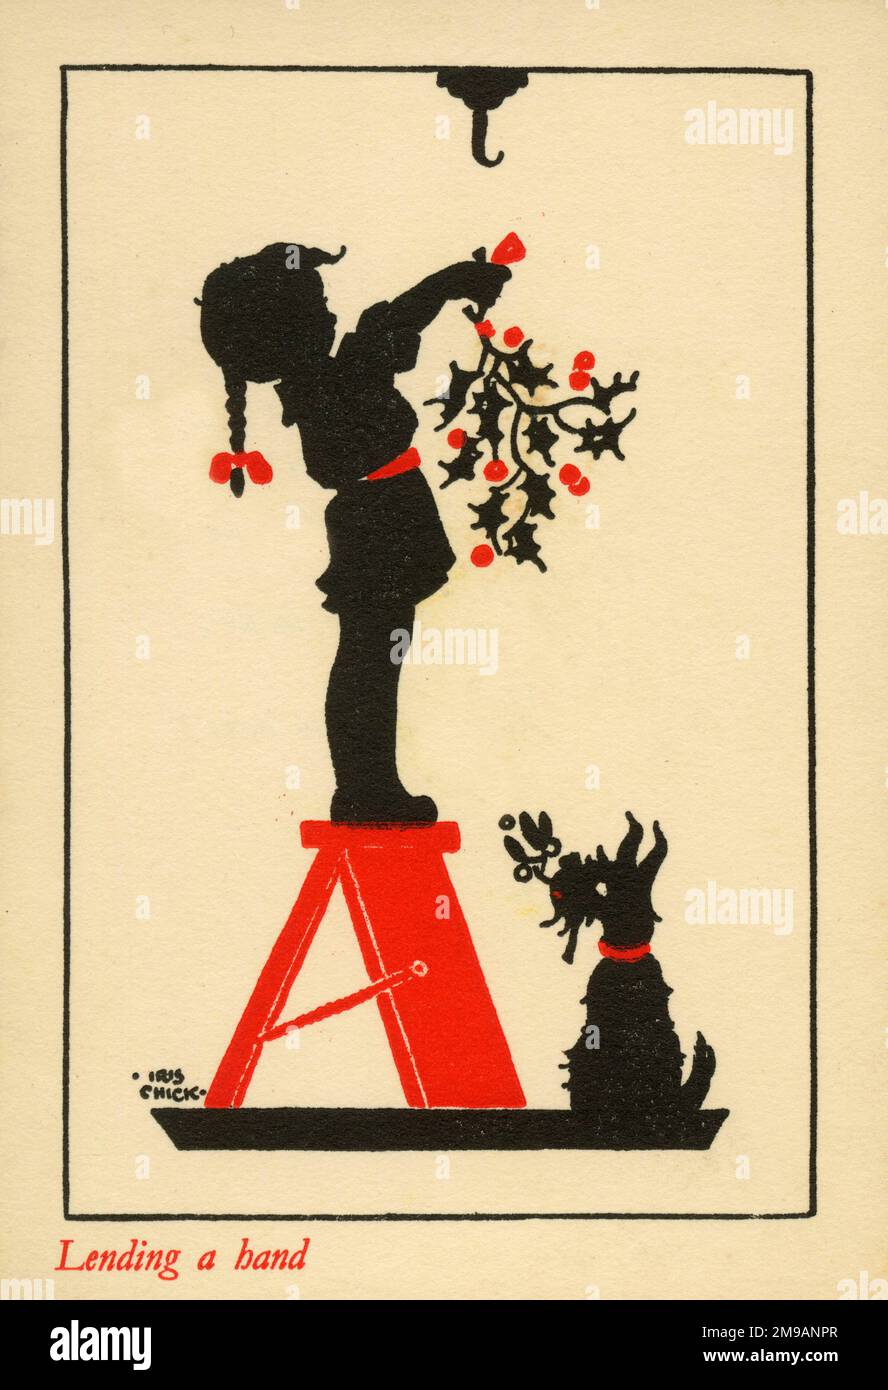 Greetings card design - Lending a hand. A little girl standing on a fold-out step to hang up the sprig of Christmas holly, whilst her pet black scottie dog stands attentively offering assistance. Stock Photo